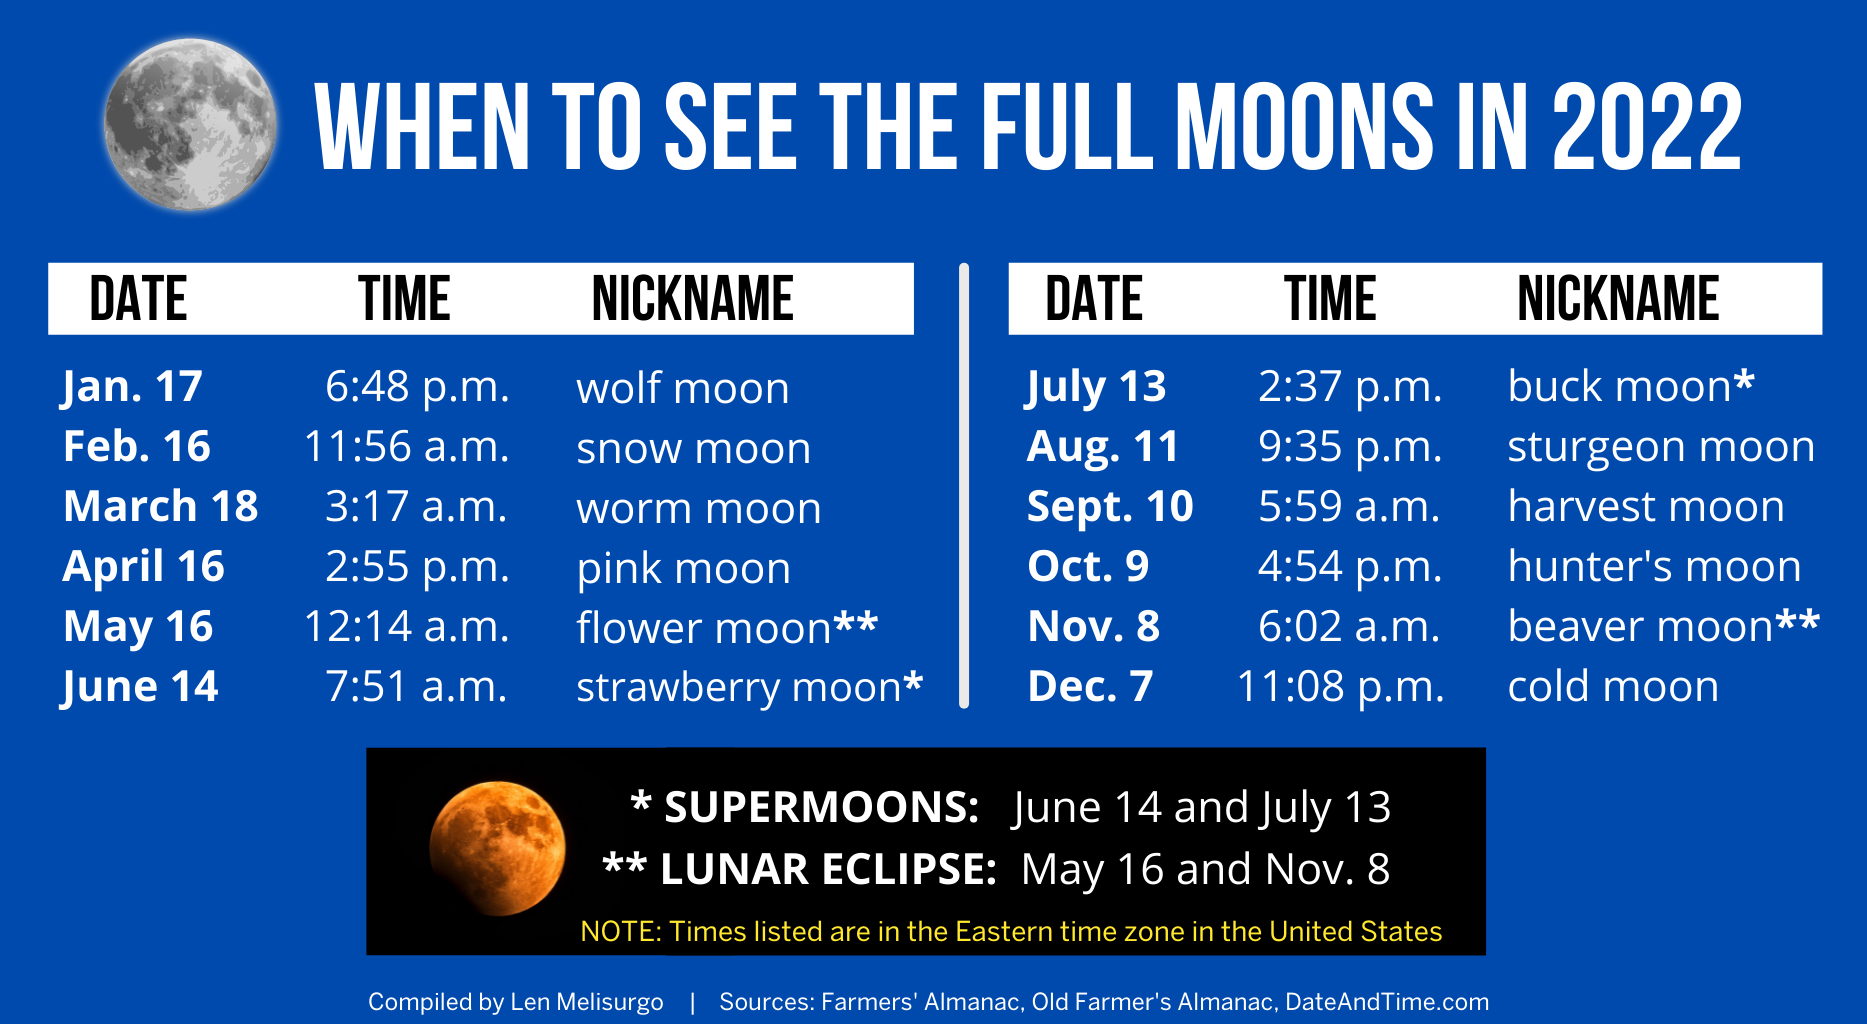 Florida Moon Calendar 2022 The 12 Full Moons In 2022 Will Include 2 Supermoons, 2 Lunar Eclipses -  Nj.com